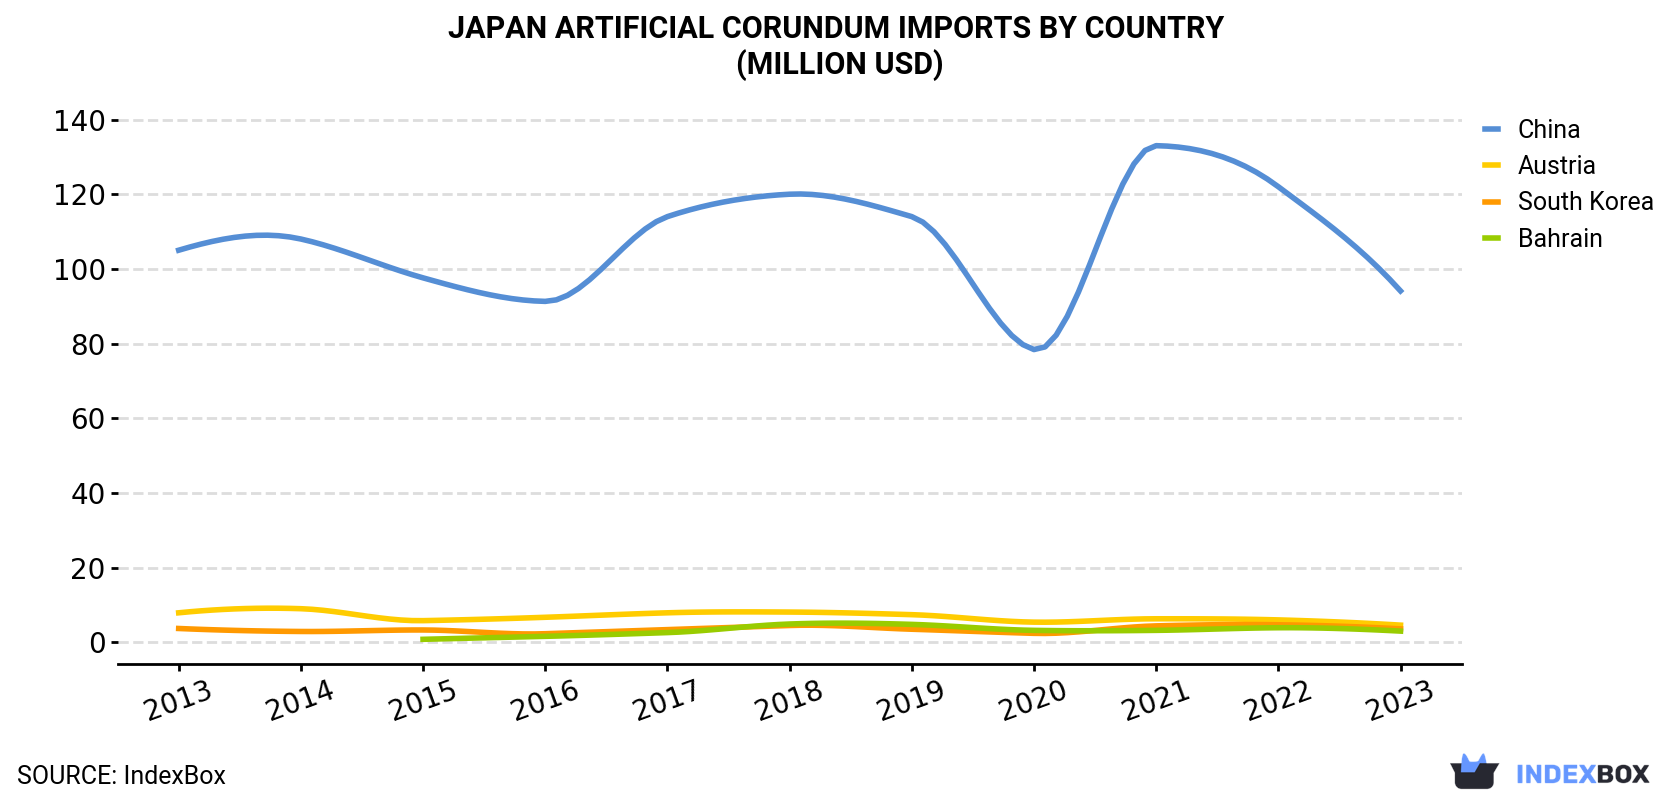 Japan Artificial Corundum Imports By Country (Million USD)